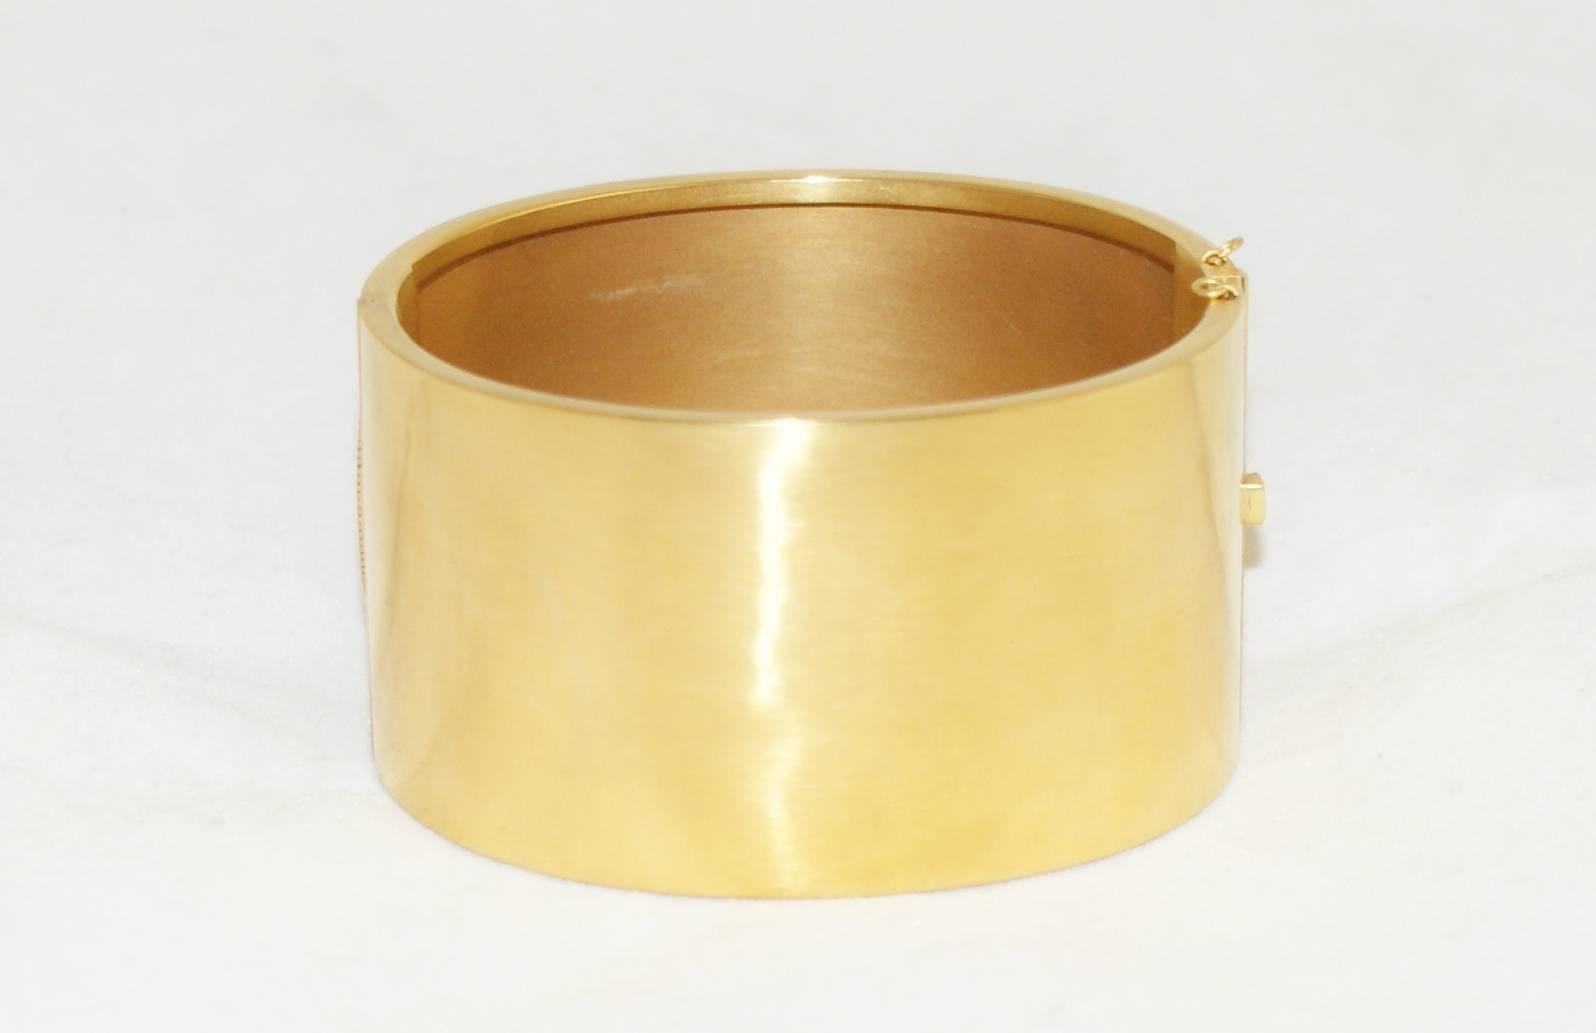 Etruscan Revival Victorian Gold Bangle For Sale